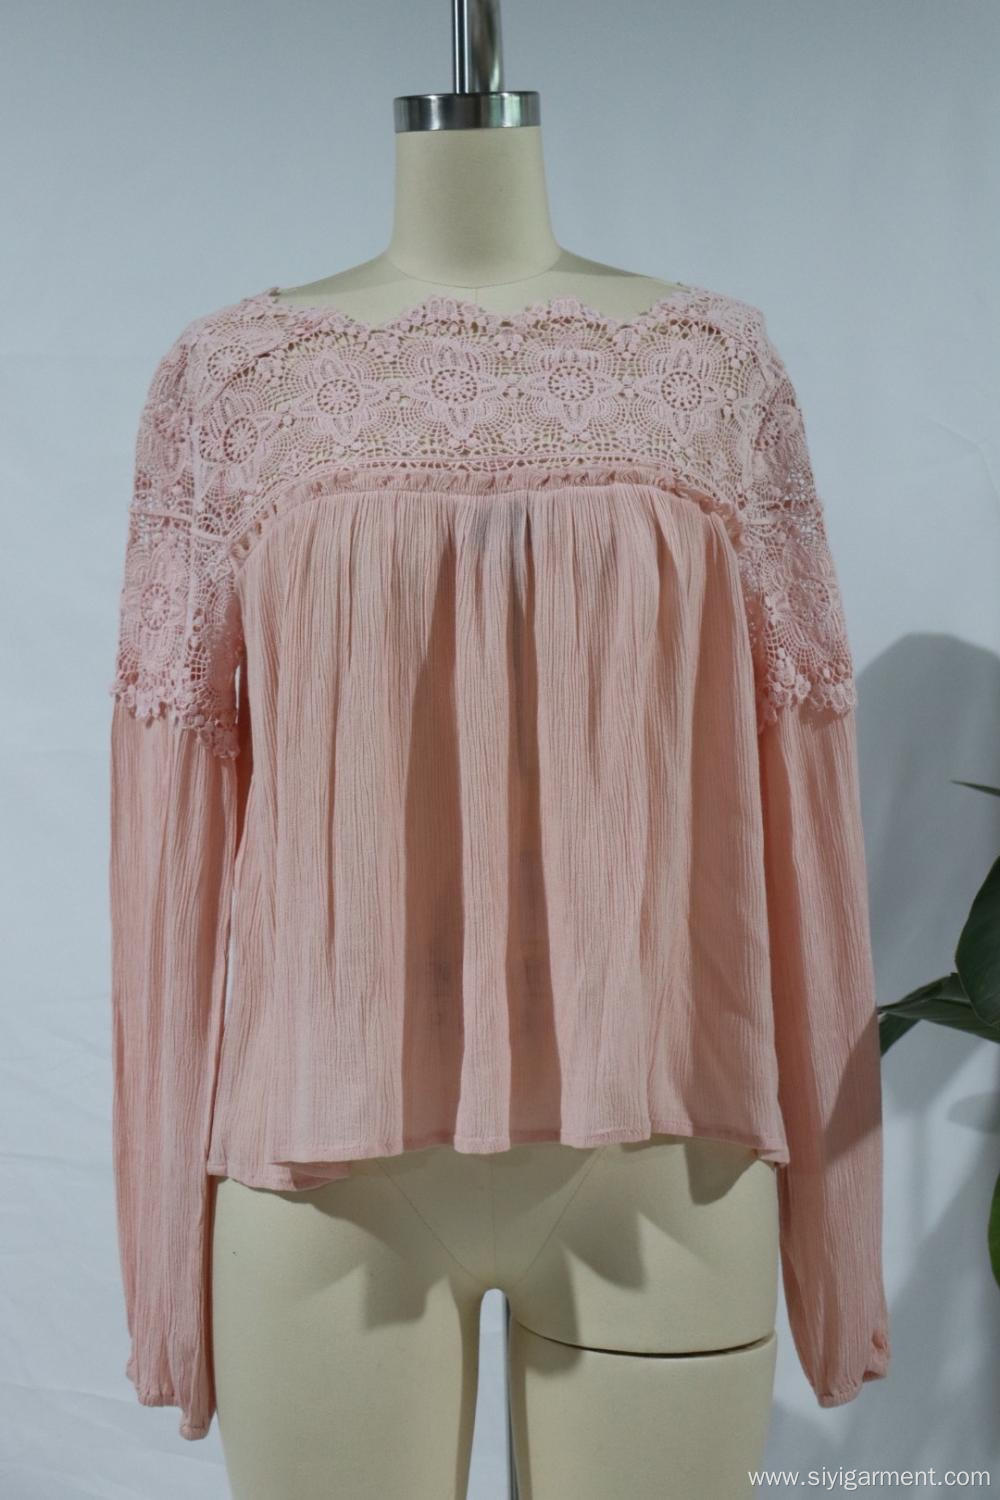 Ladies' Long-Sleeved Blouse With Lace Collar